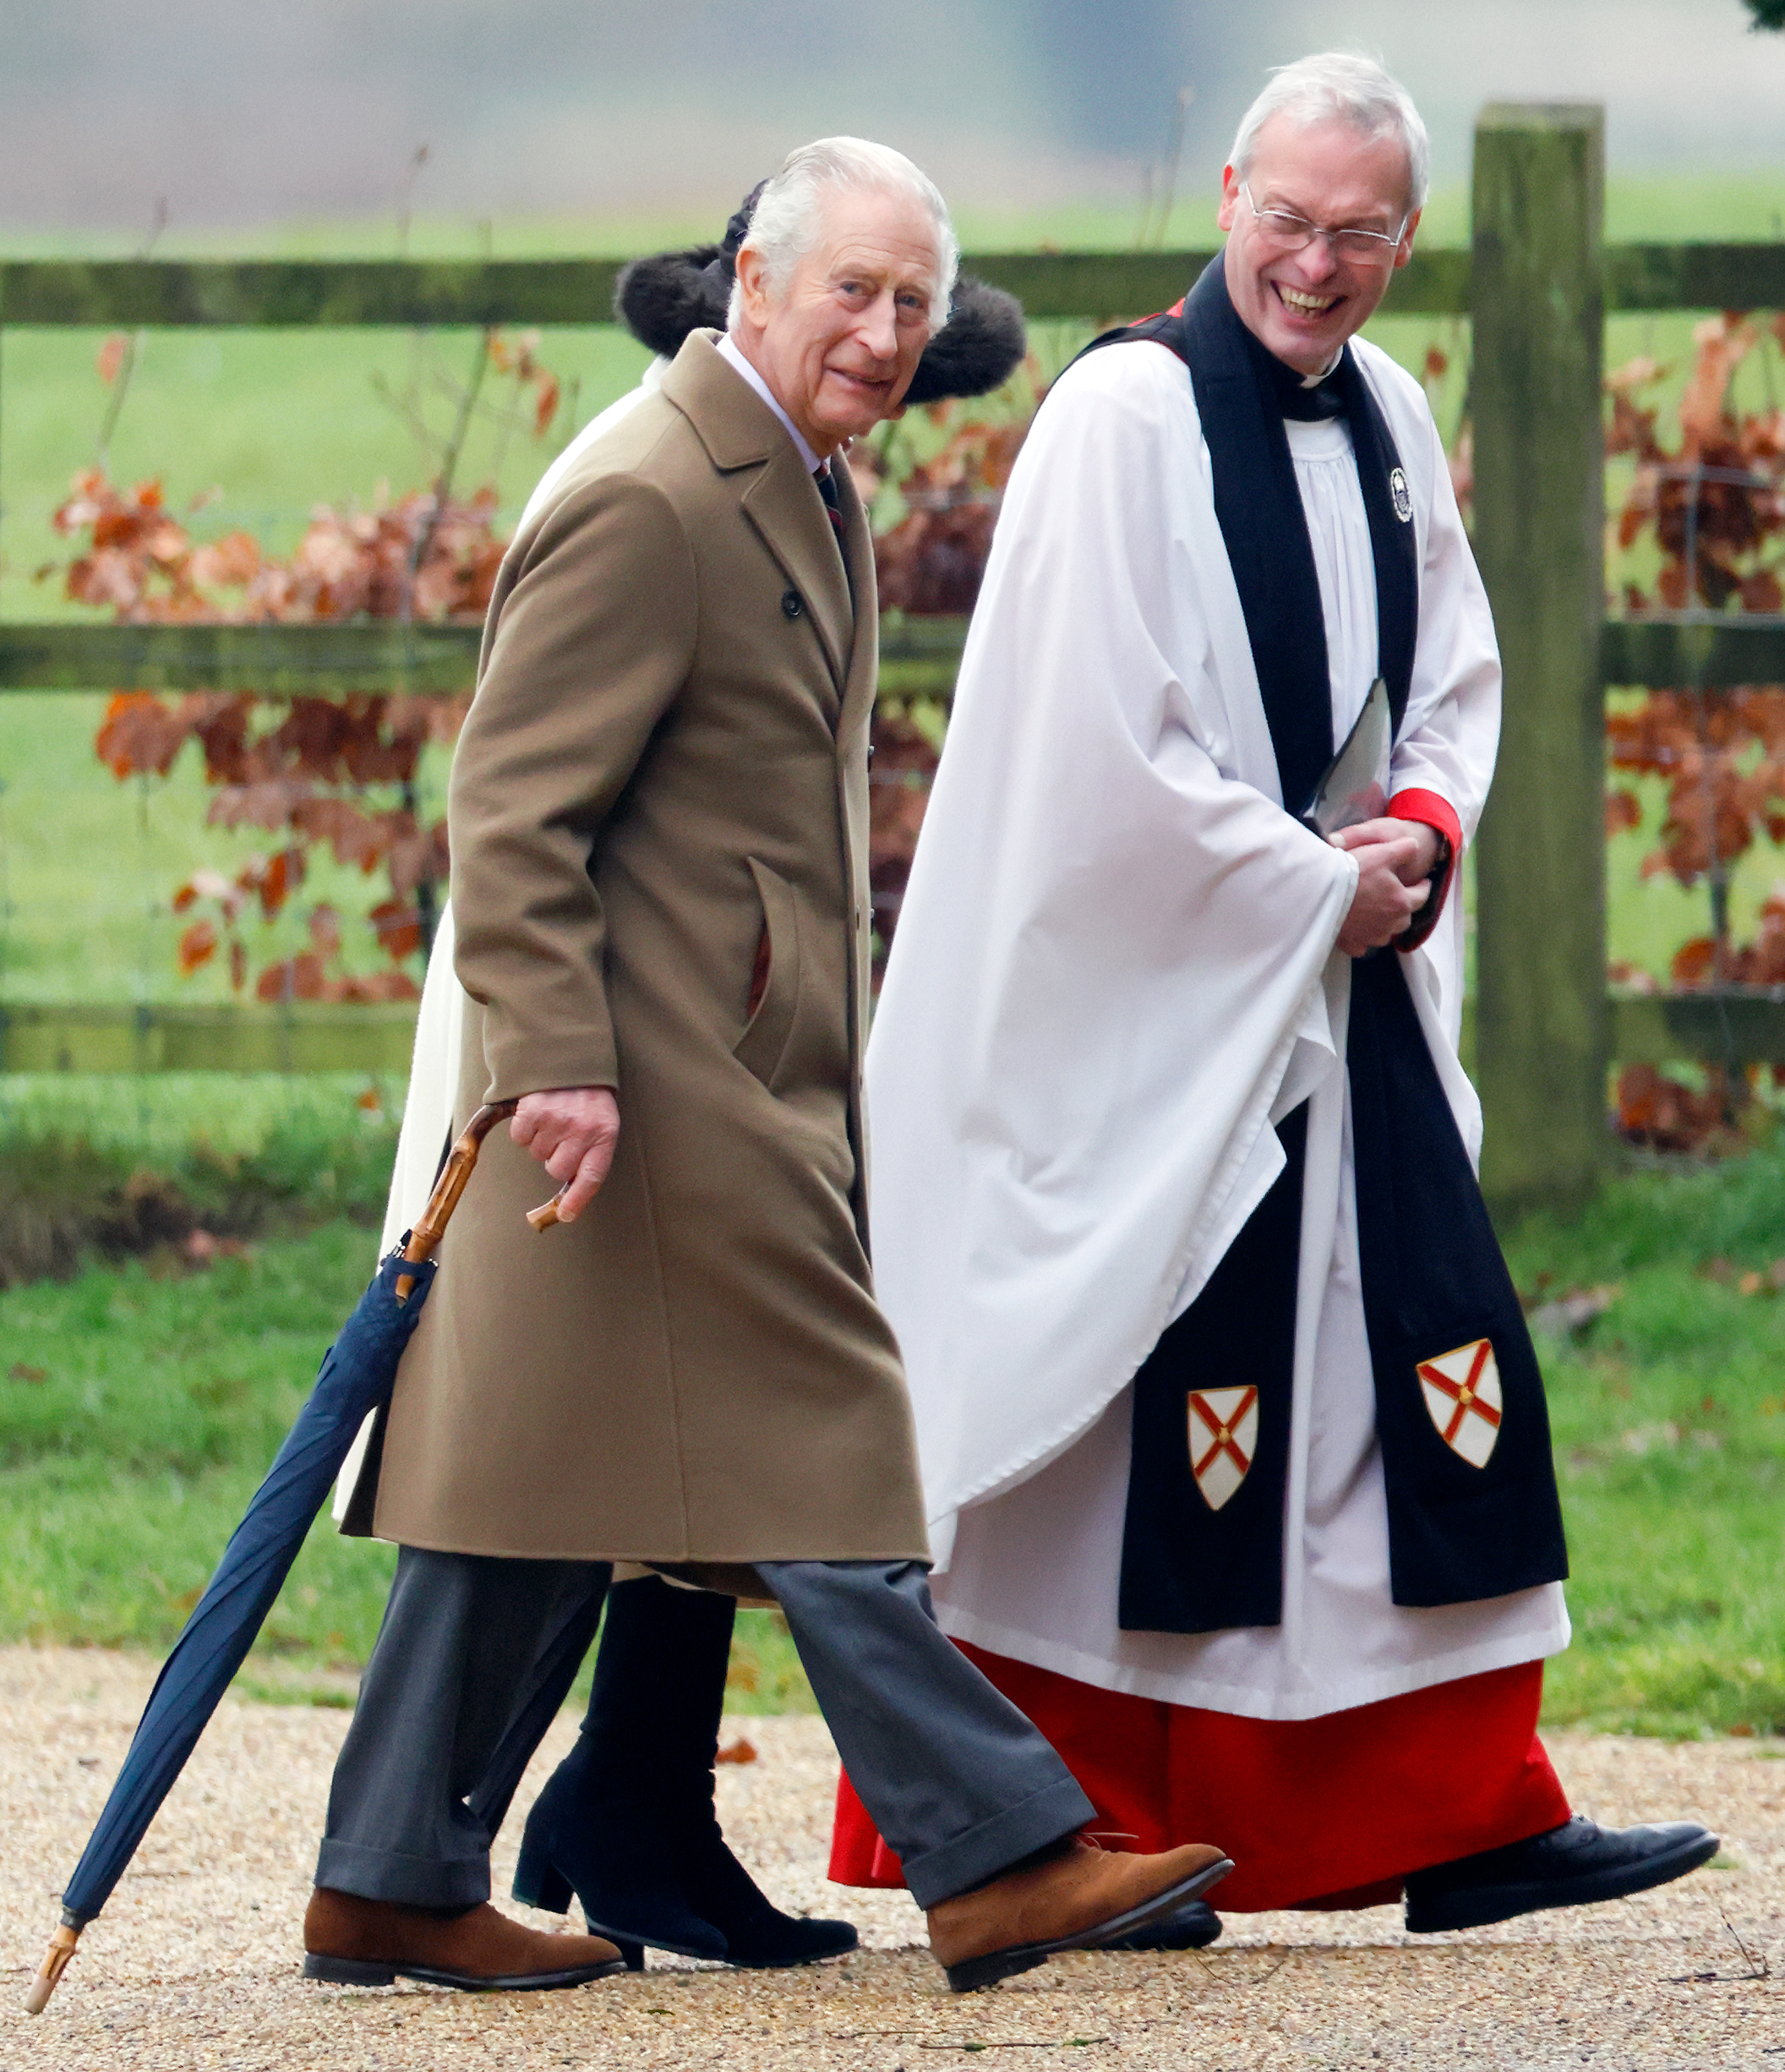 King Charles III and Queen Camilla, accompanied by The Reverend Canon Dr. Paul Williams, at the Sunday service at the Church of St. Mary Magdalene on the Sandringham estate on February 11, 2024 | Source: Getty Images